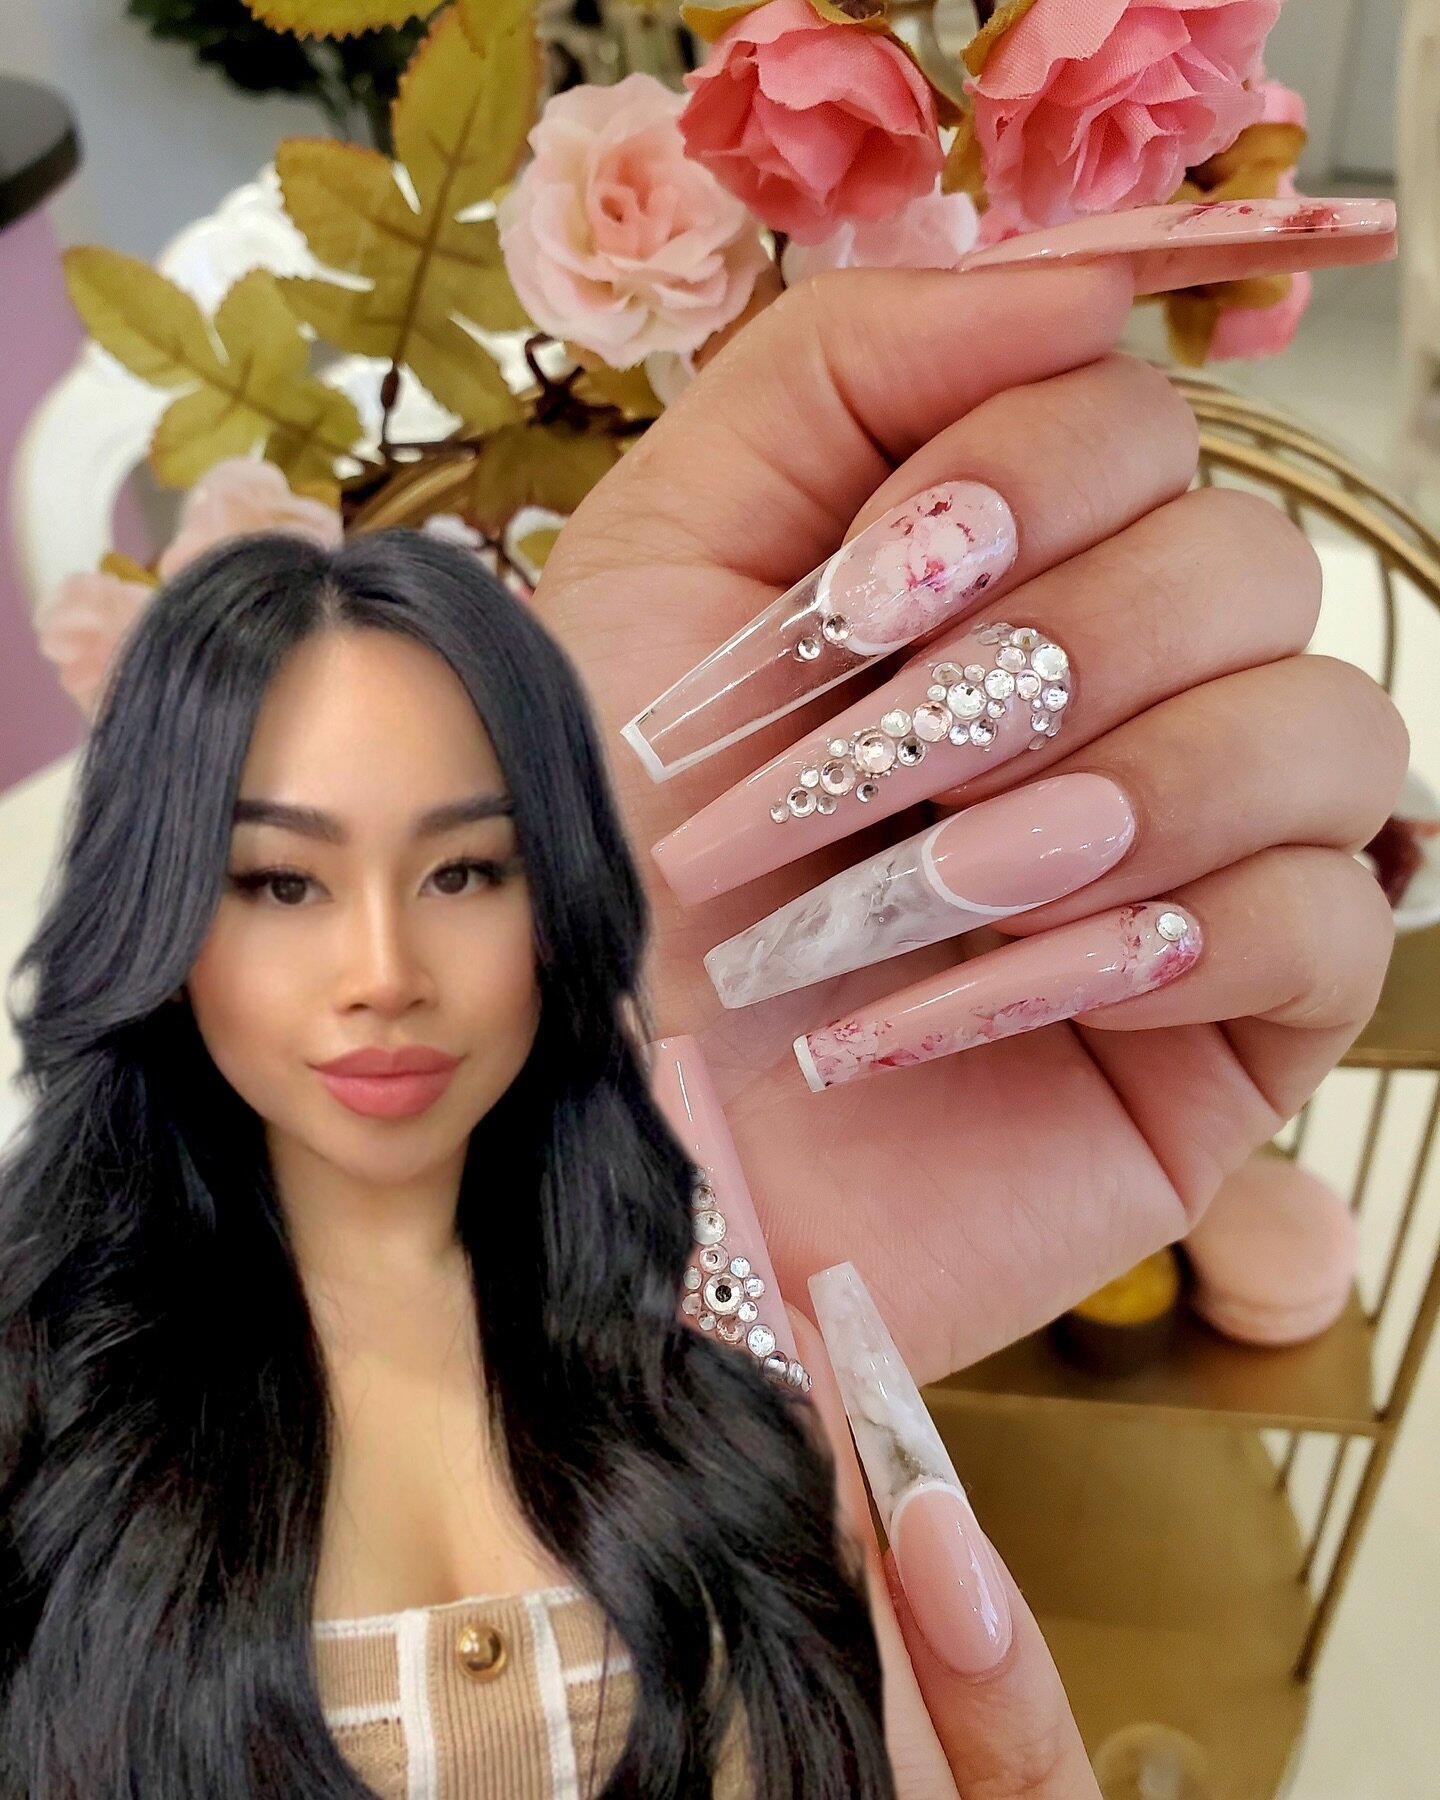 Meet Liang, the face behind @Liangnails 
𝑪𝒆𝒓𝒕𝒊𝒇𝒊𝒆𝒅 𝑪𝒐𝒔𝒎𝒆𝒕𝒐𝒍𝒐𝒈𝒊𝒔𝒕, 𝑴𝒂𝒔𝒕𝒆𝒓 𝑮𝒆𝒍 𝑨𝒓𝒕𝒊𝒔𝒕

Hello everyone! I&rsquo;d like to share a little more about myself here 💝

I&rsquo;ve always had a passion for everything beaut